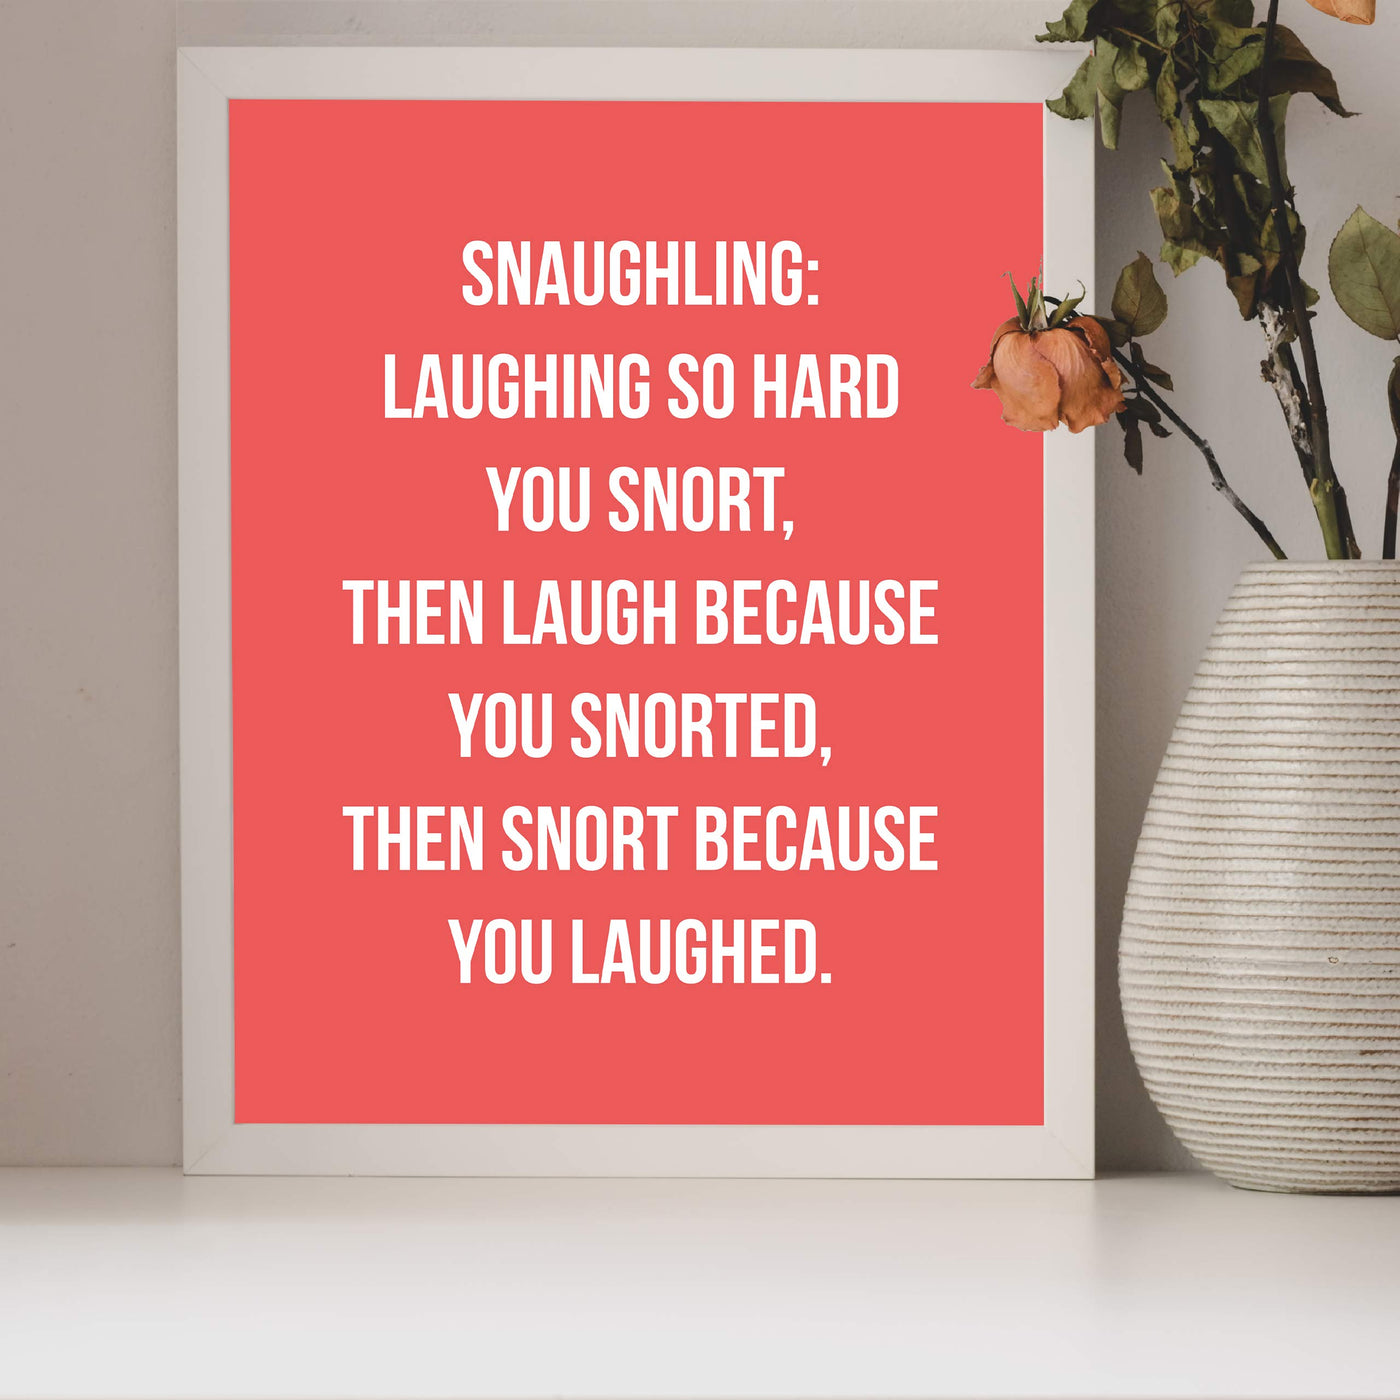 Snaughling: Laughing So Hard You Snort Funny Wall Art Sign -8 x 10" Typographic Poster Print-Ready to Frame. Humorous Home-Bar-Shop-Cave-Novelty Decor. Perfect Desk & Cubicle Sign! Great Gift!